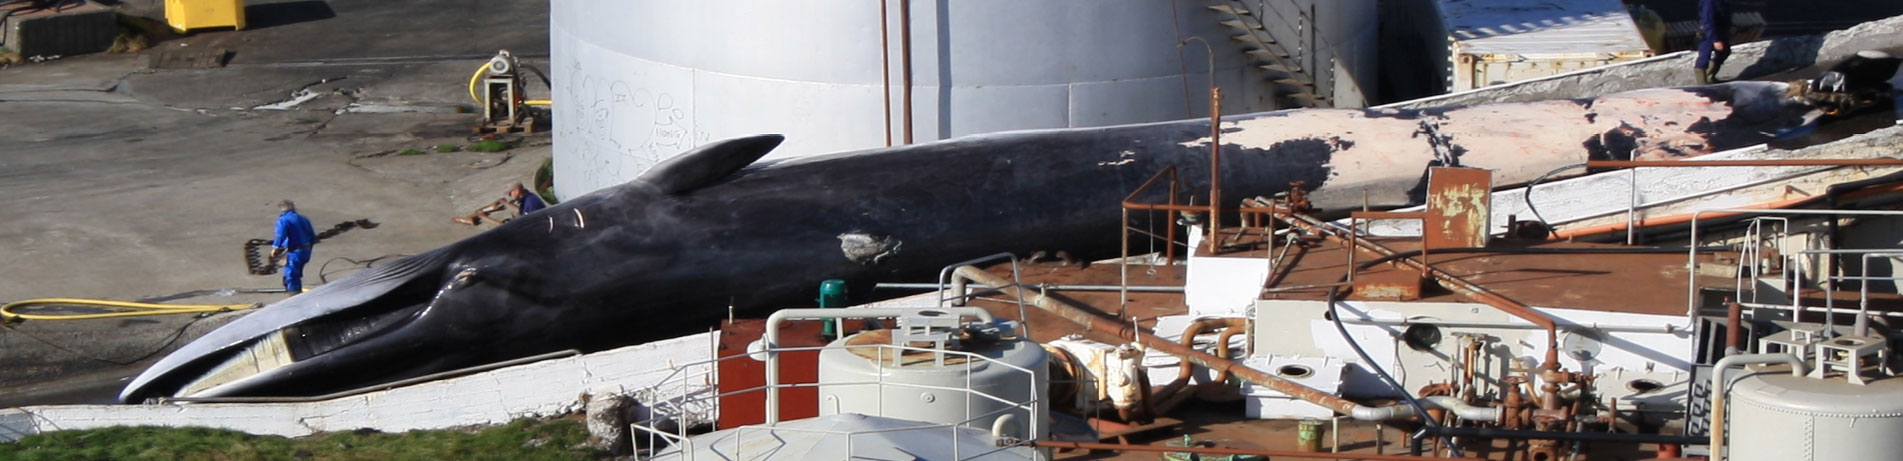 Dead fin whale being processed in a whaling factory, Reykjavik, Iceland